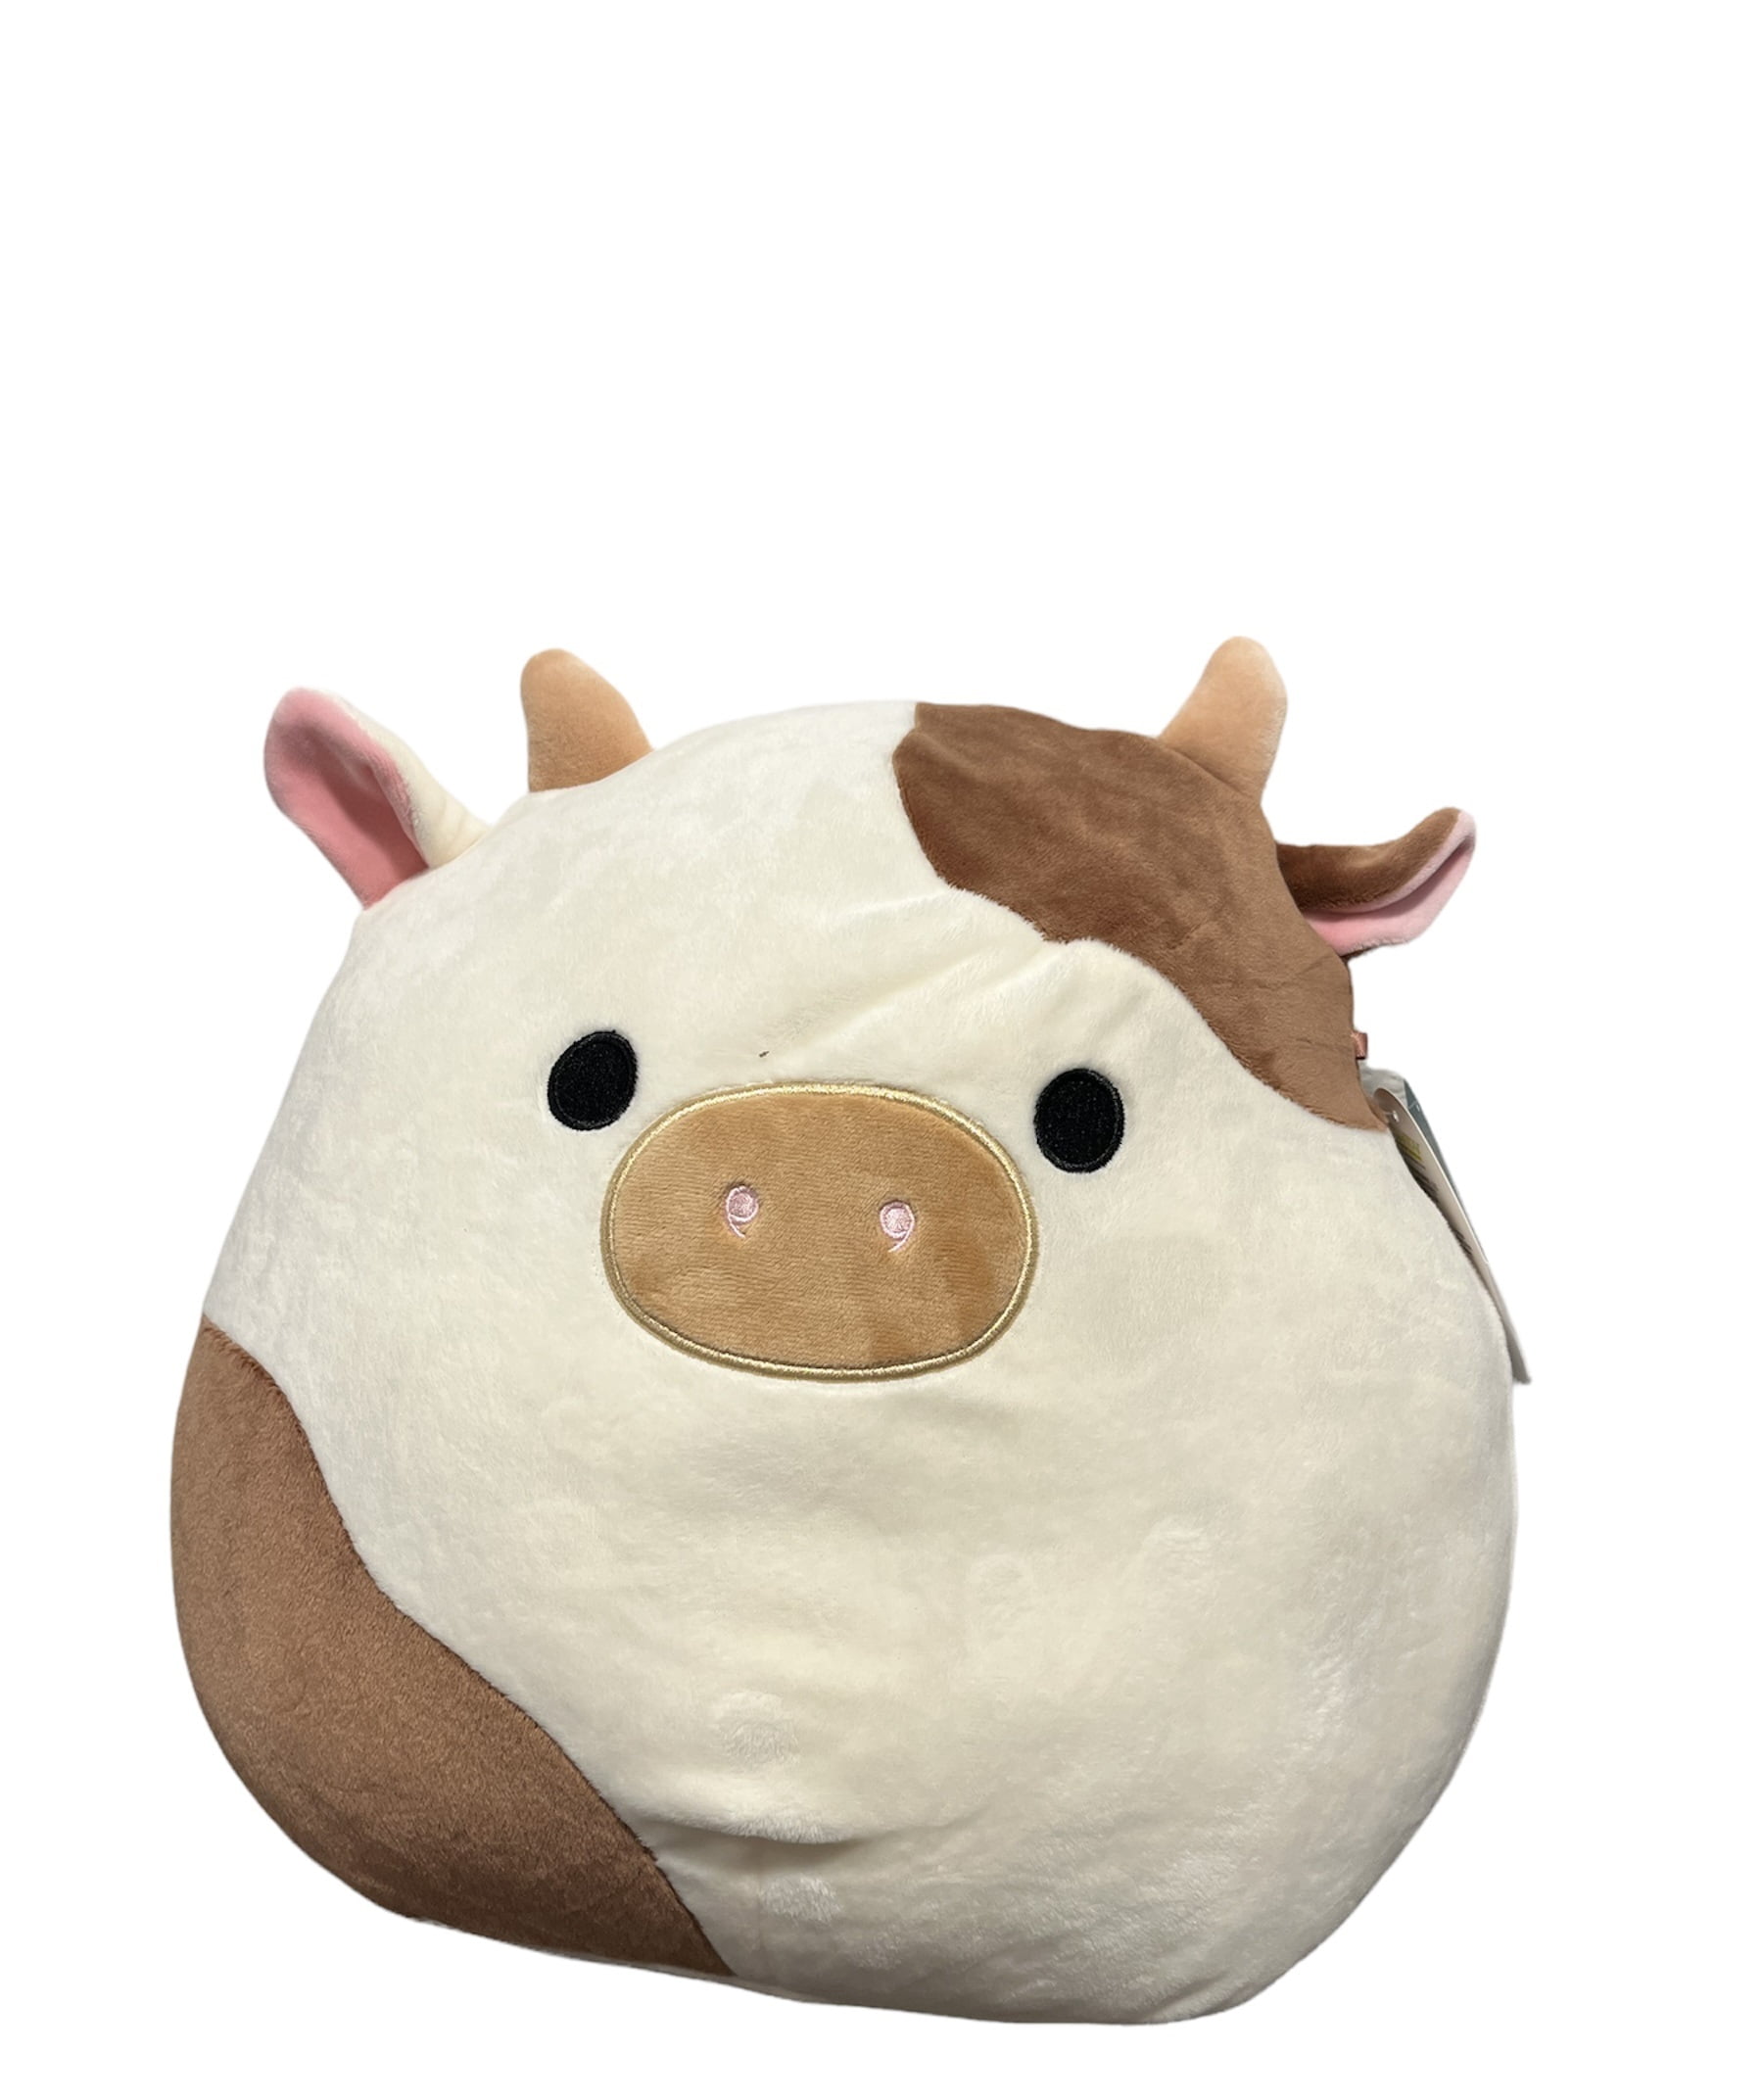 Details about   Squishmallow 12IN Harry the Brown Horse Spotted KellyToy 2021 Walmart Free Ship 